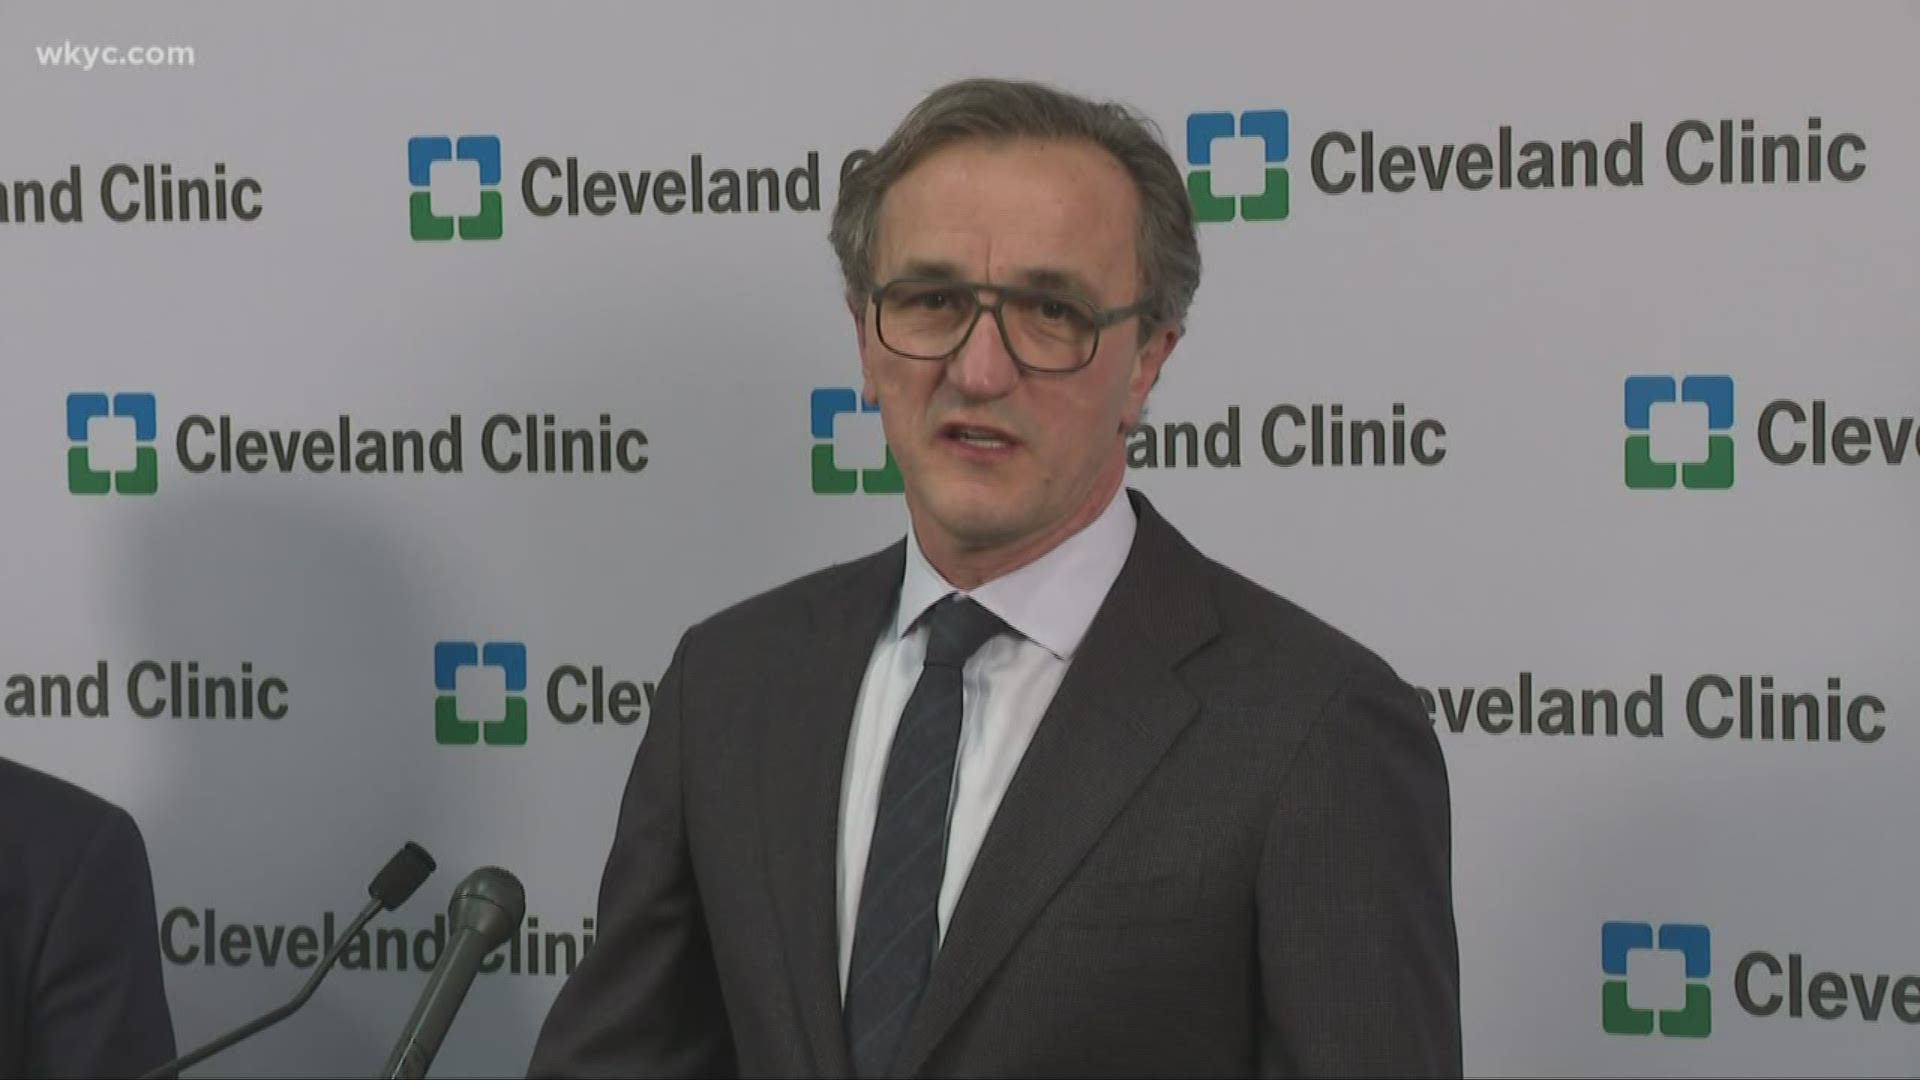 New testing capabilities allow for faster result. The Cleveland Clinic is now able to test up to 500 cases a day.